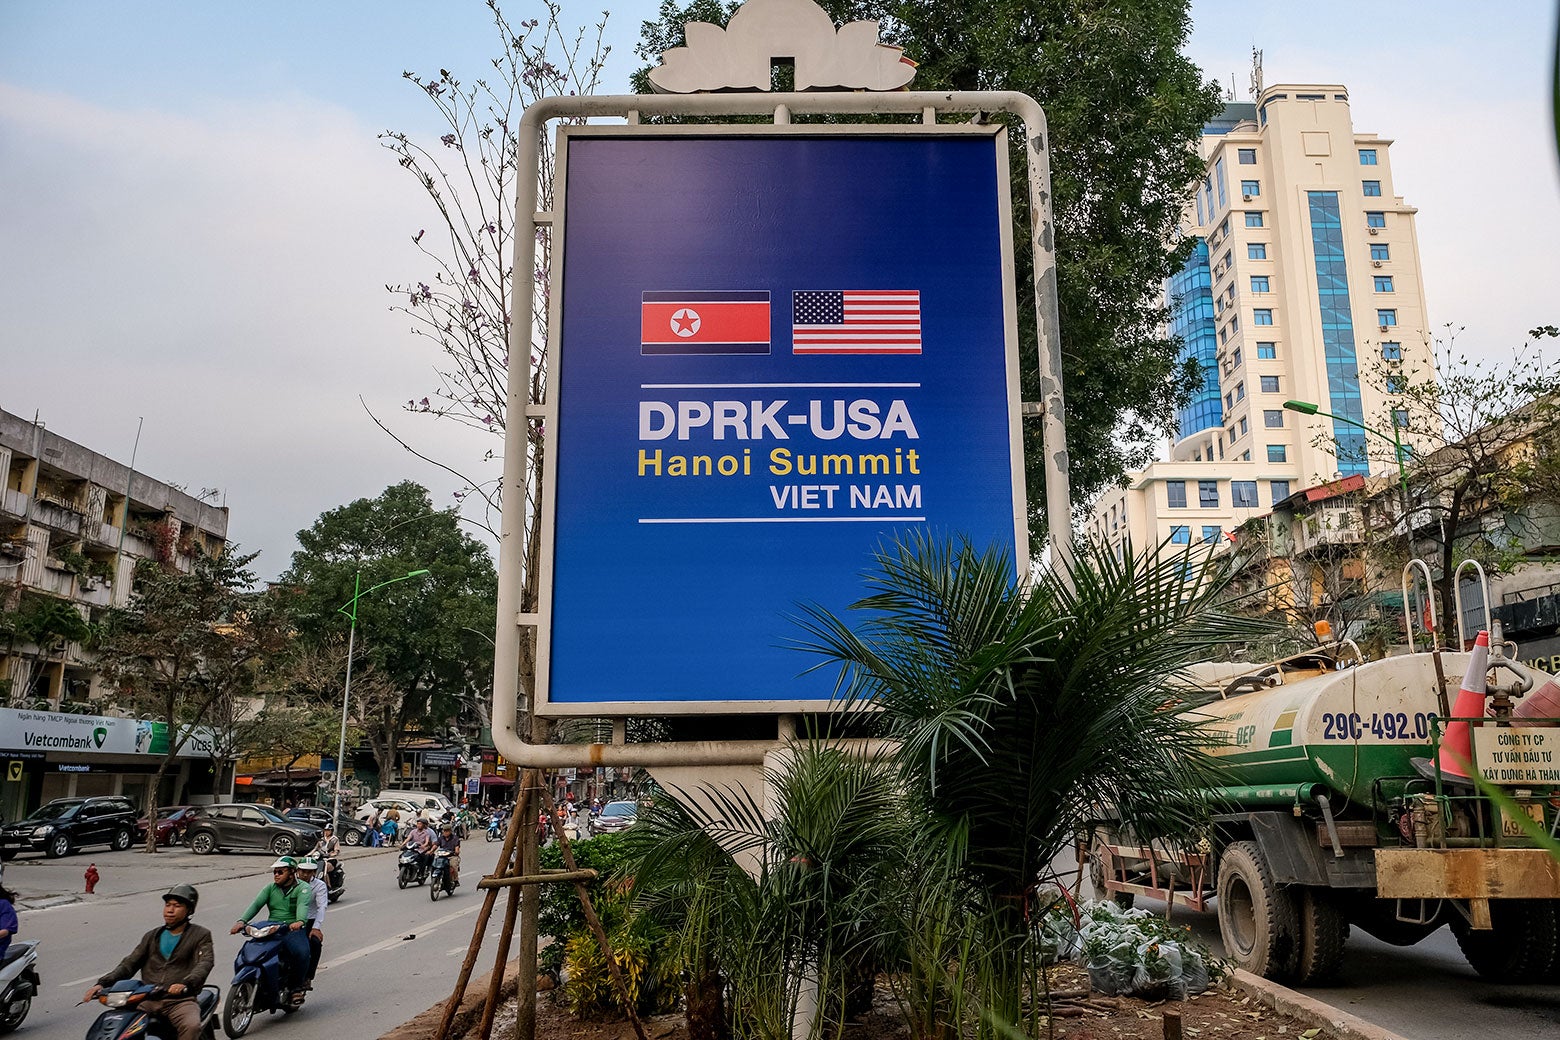 A public signboard welcomes the upcoming summit between U.S. President Donald Trump and North Korean Leader Kim Jong Un.